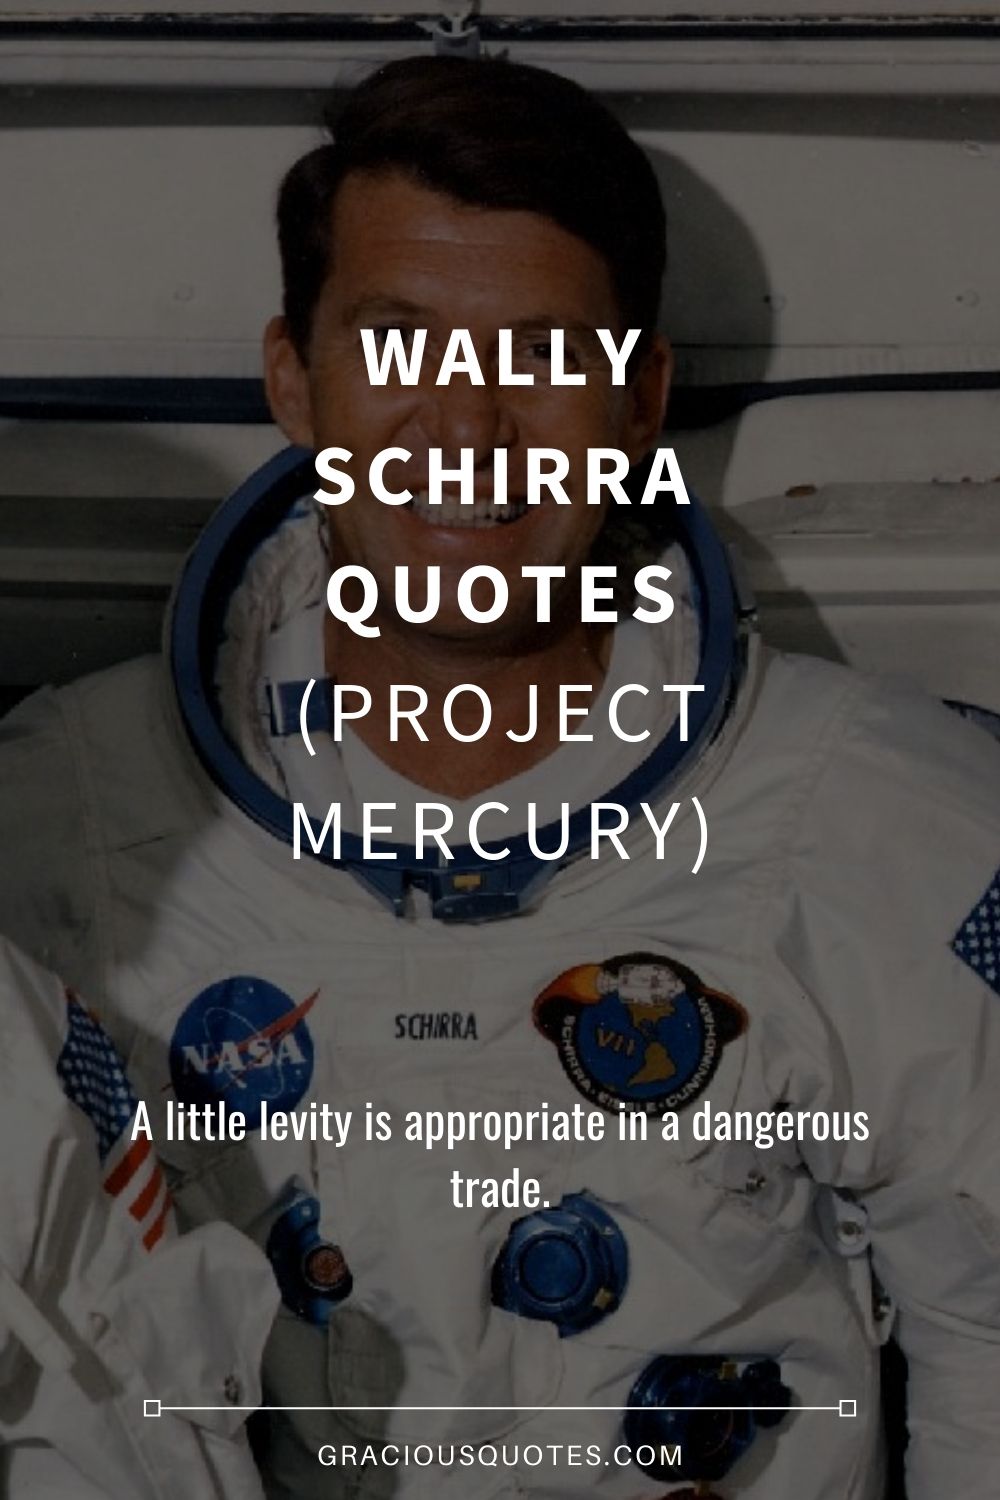 Wally Schirra Quotes (PROJECT MERCURY) - Gracious Quotes